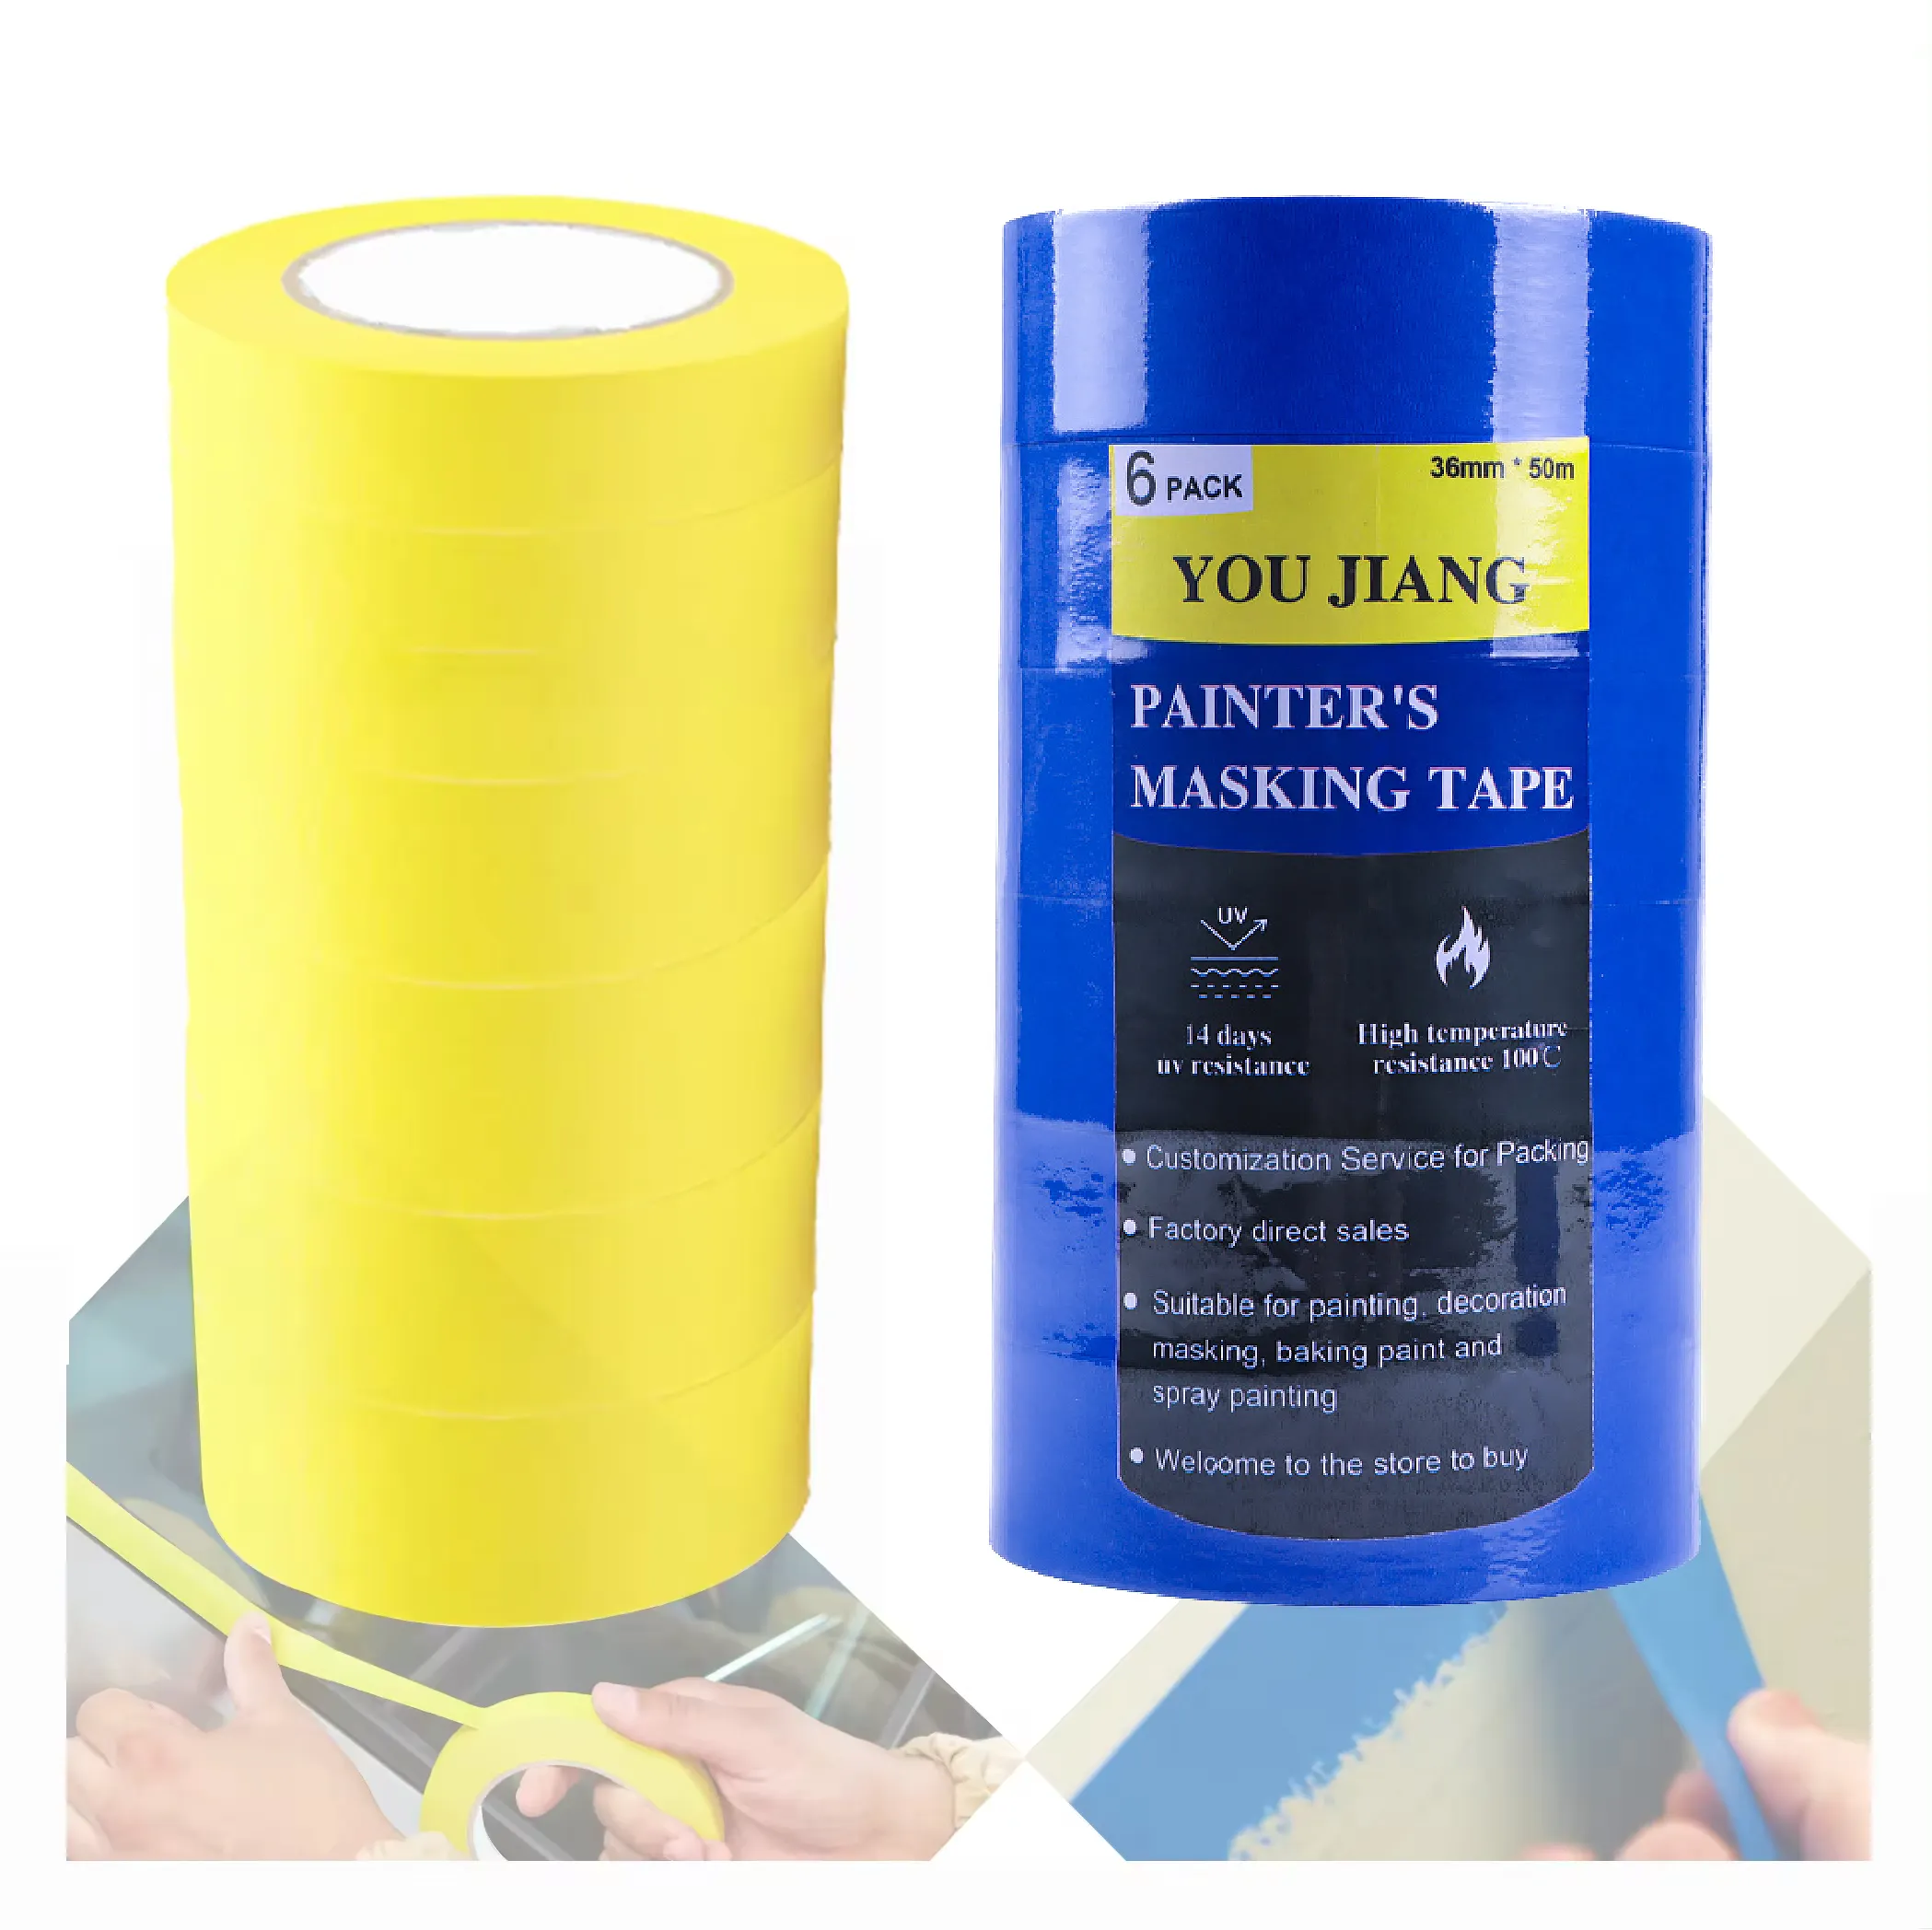 YOUJIANG Wood Painting Wall Sharp Line Blue Crepe Paper Painters 3Mm 2090 14 Days UV Resist Masking Tape